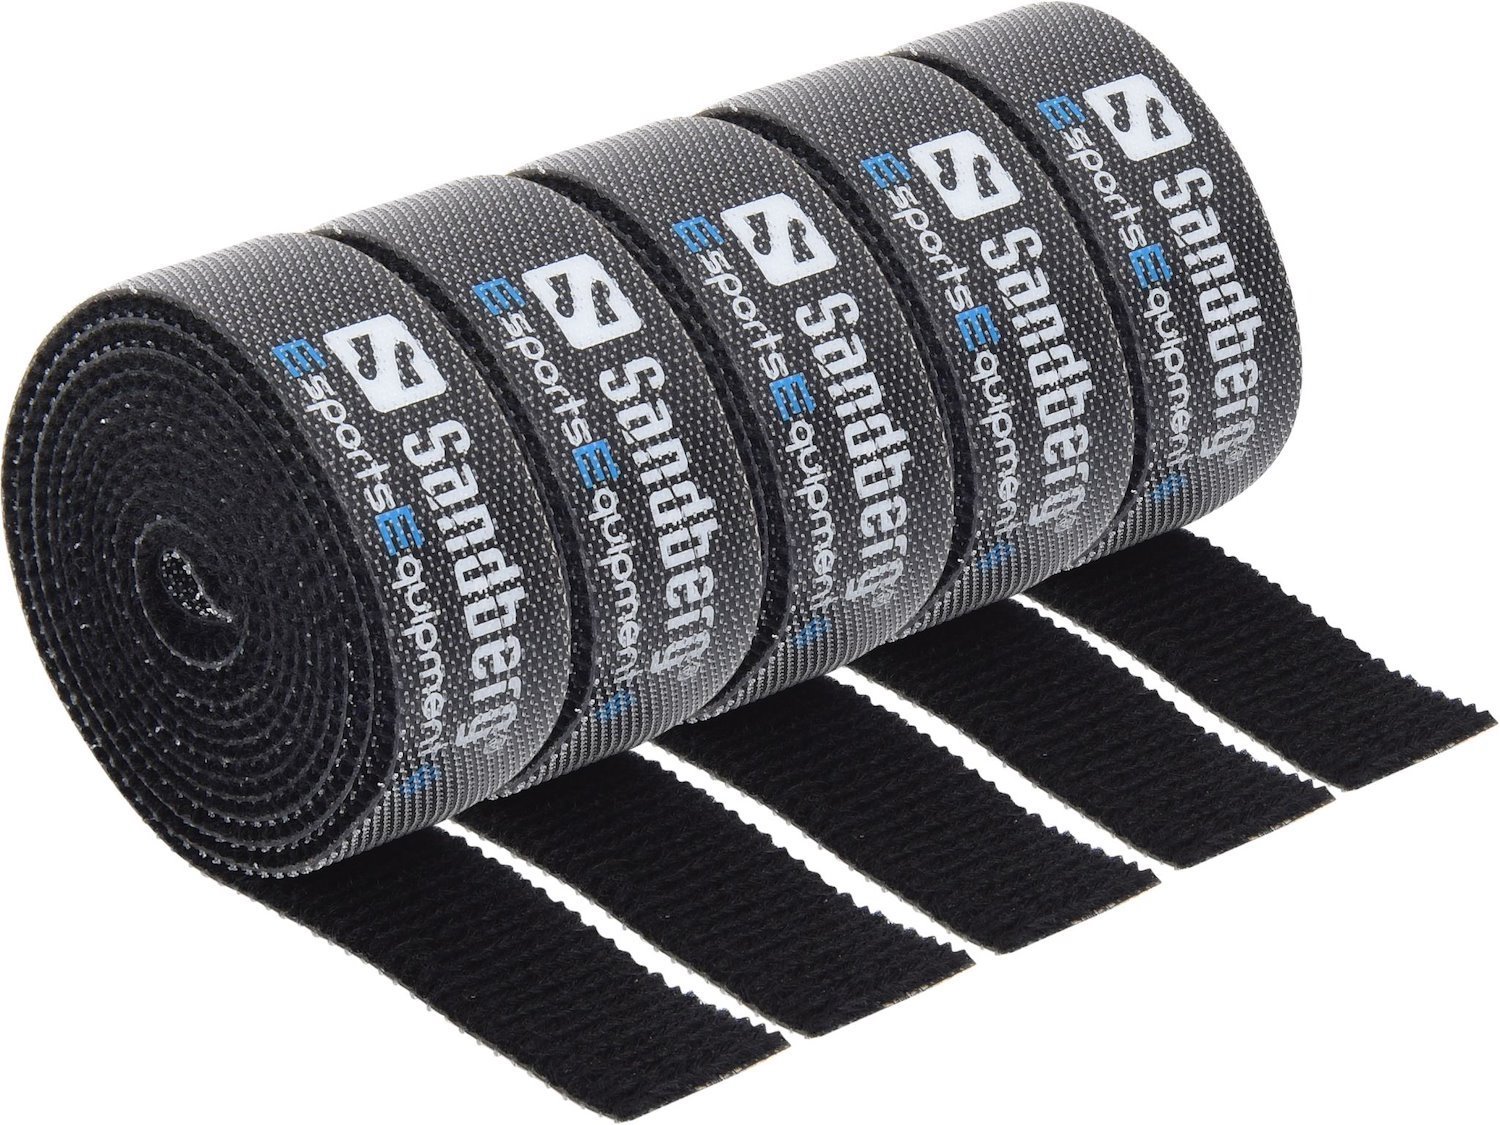 Sandberg Cable Velcro Strap 5-Pack (Sandberg Re-Usable Velcro Cable Tie 1 Metre Rolls Pack Of 5)